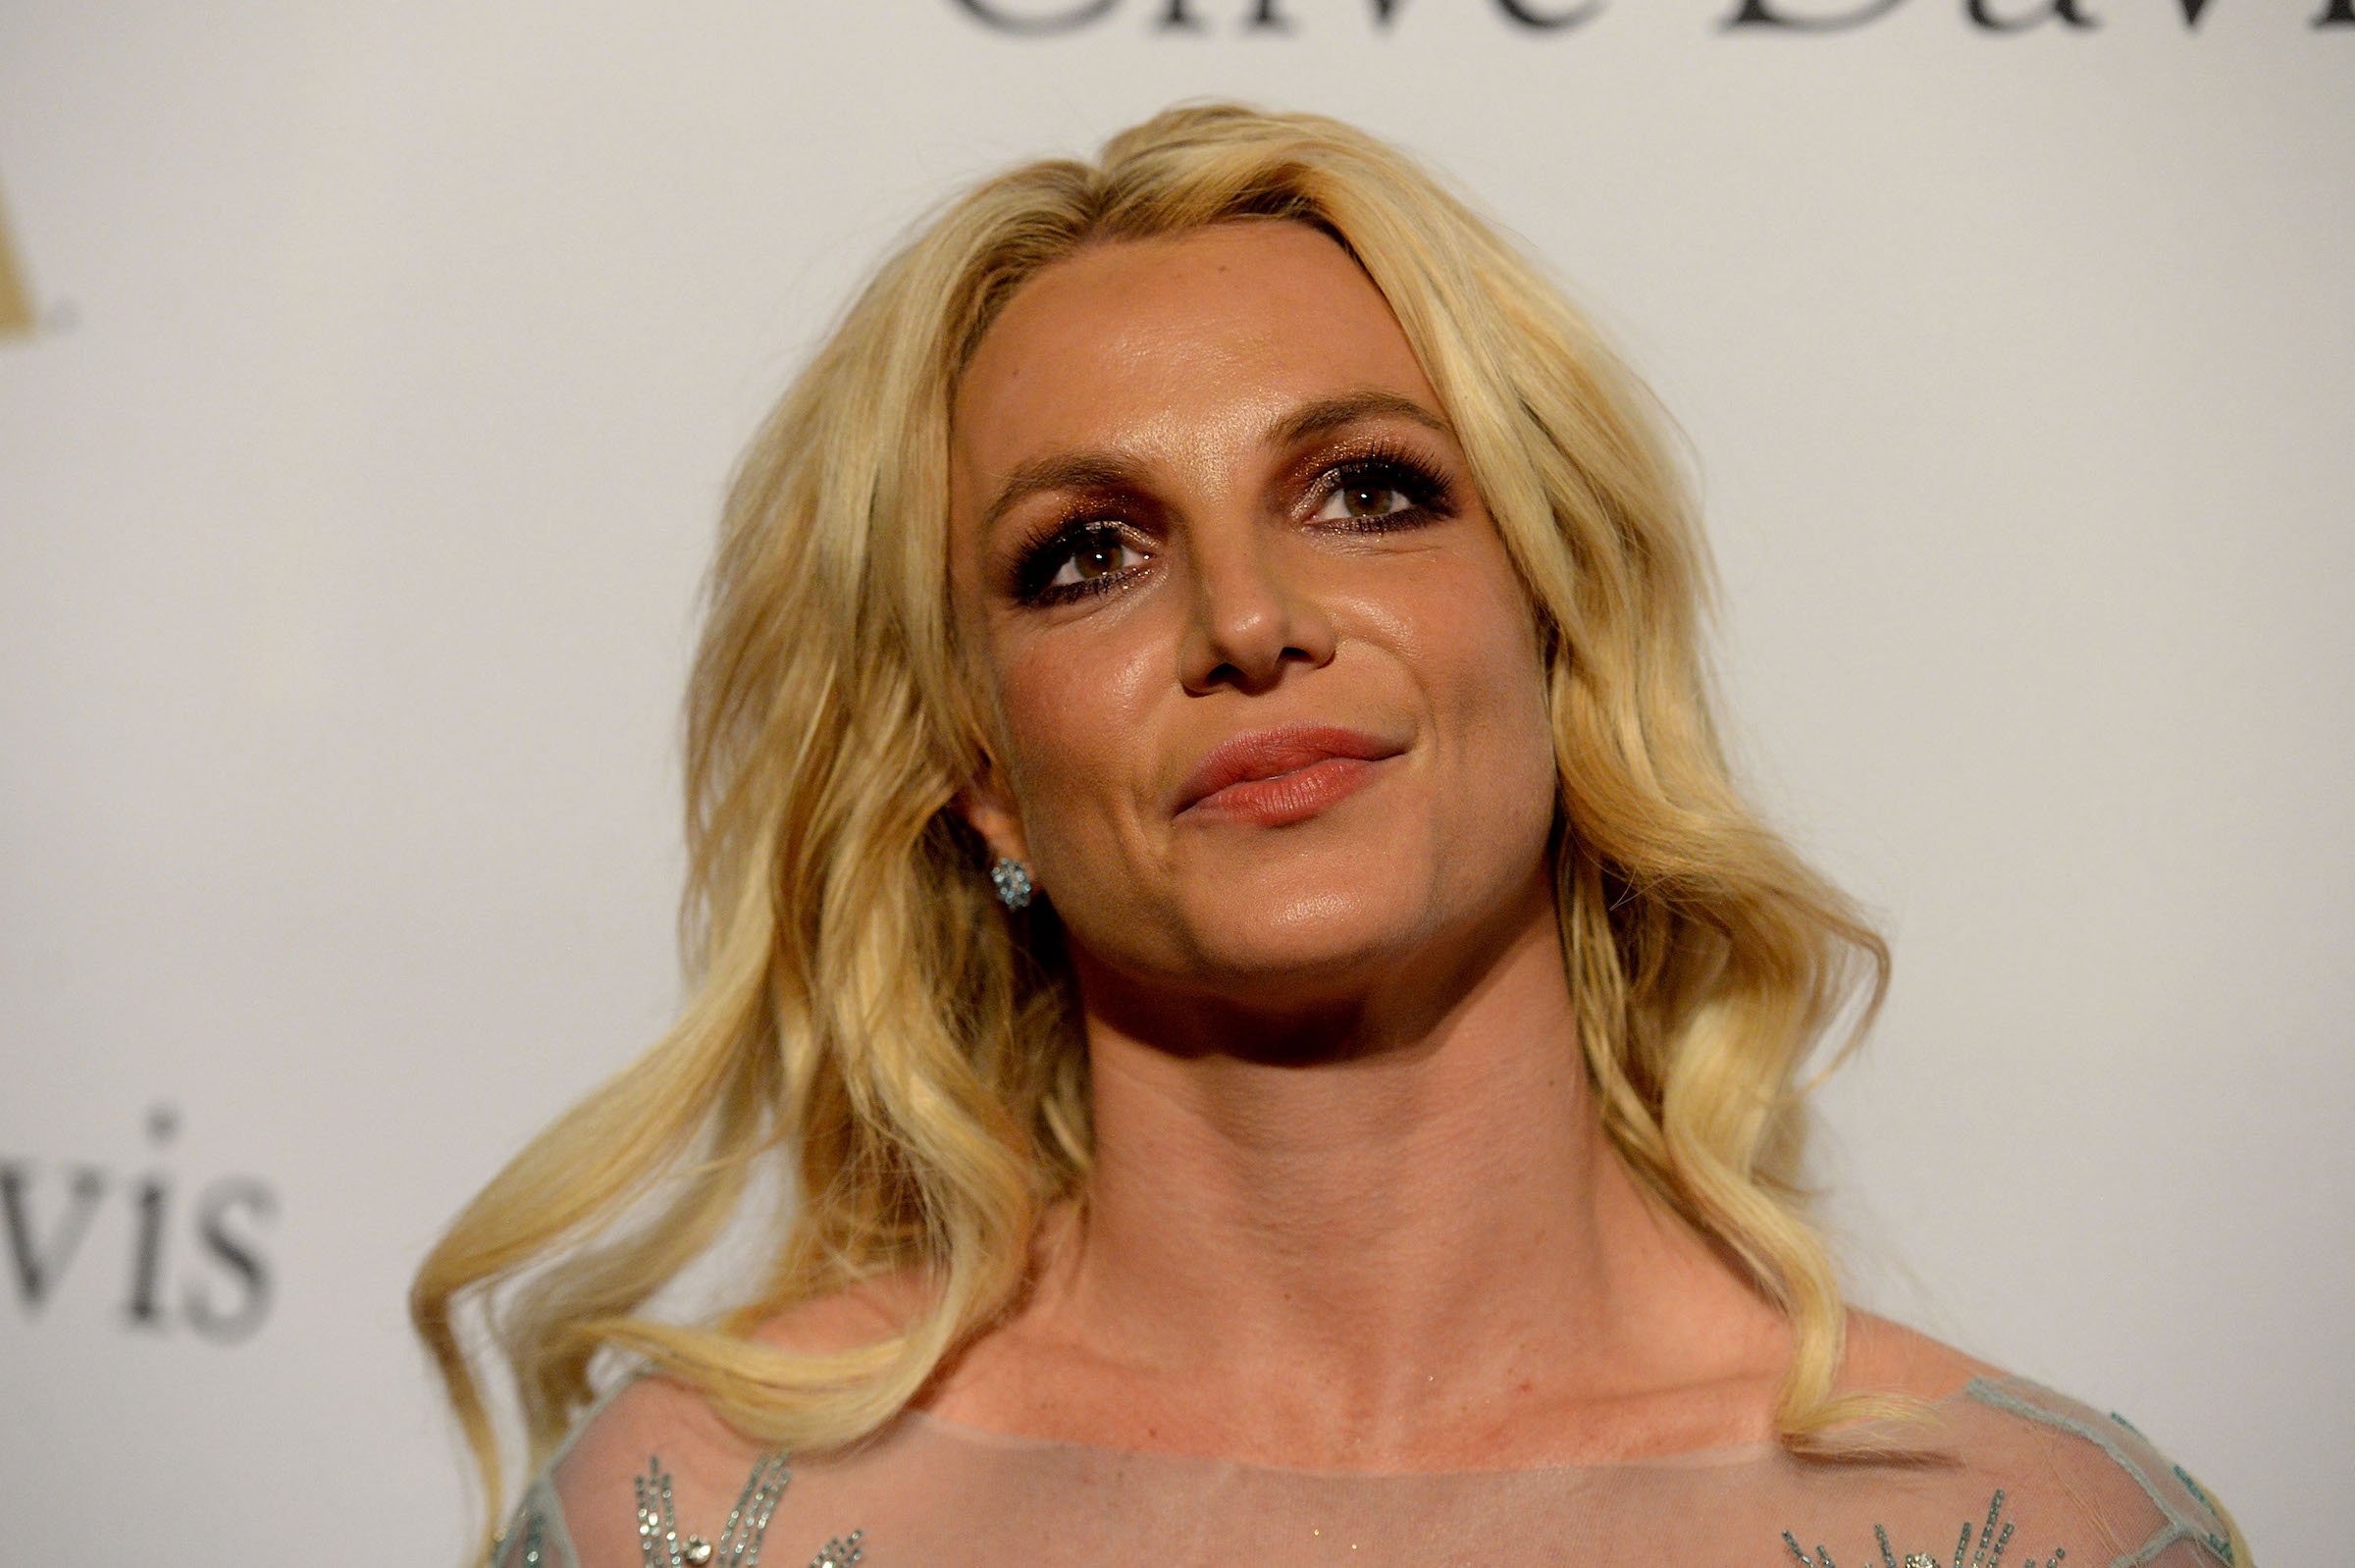 Britney Spears Turned Down ‘Lots of Money’ For an Interview With Oprah Winfrey